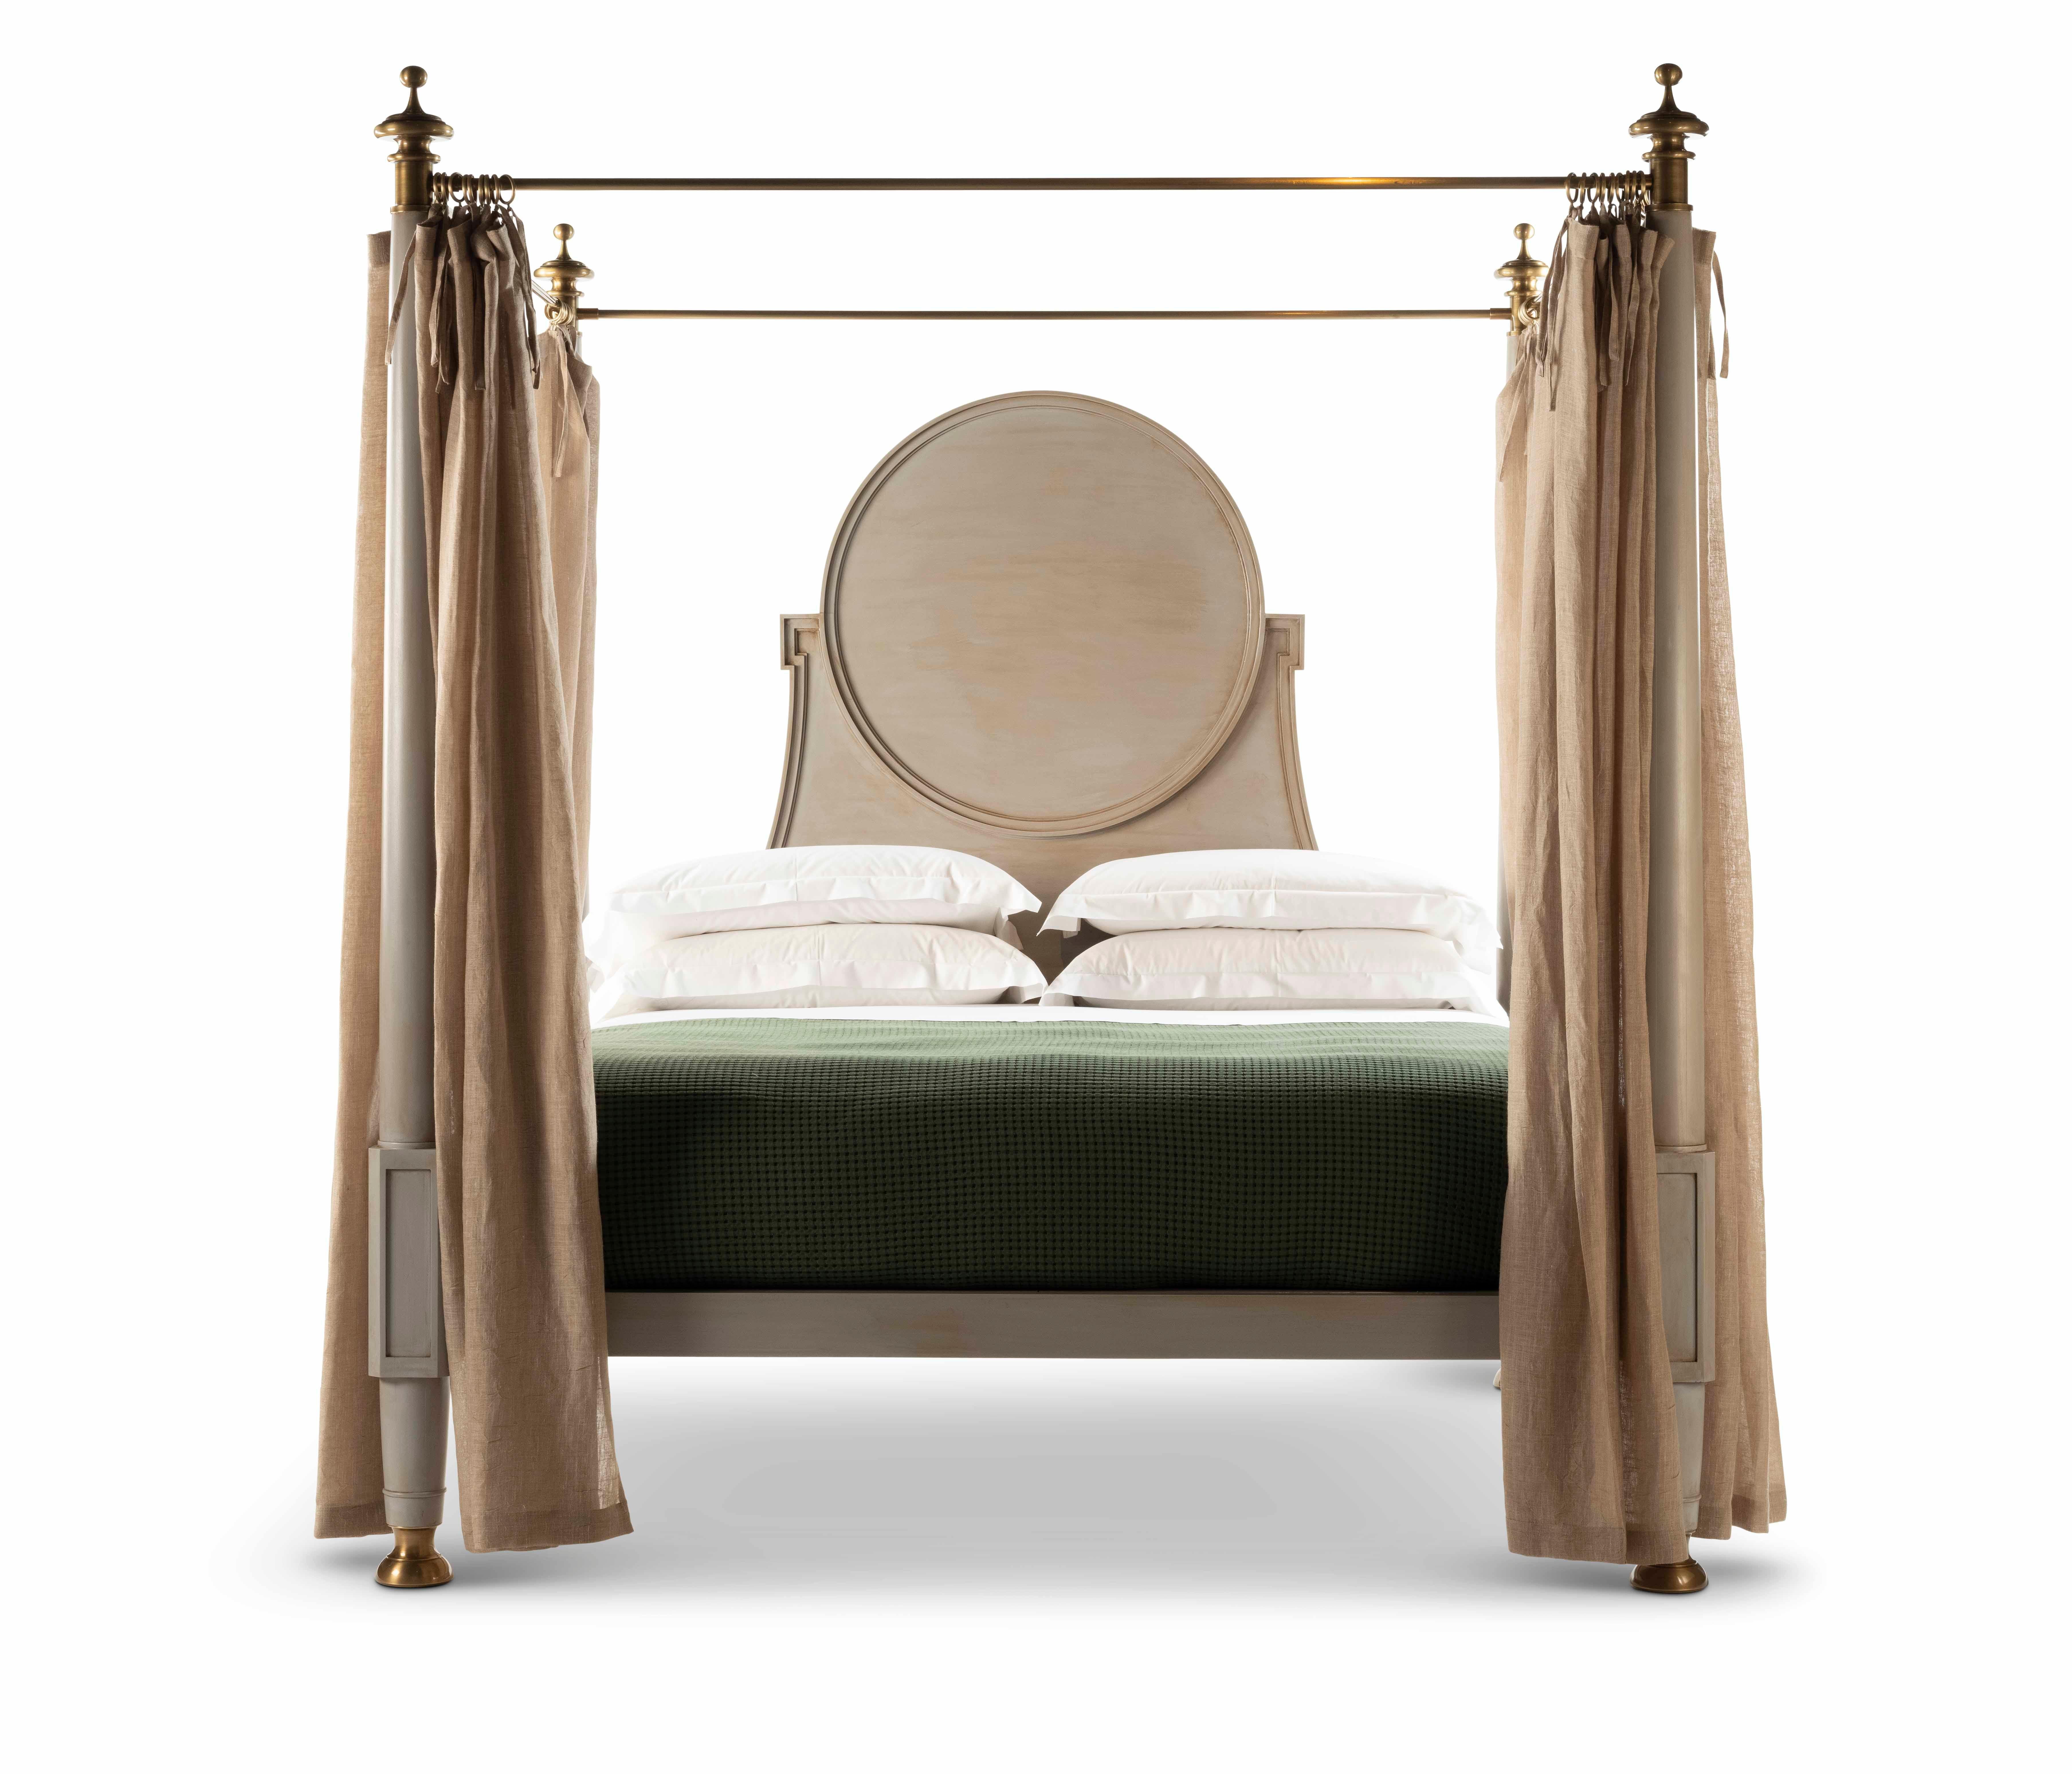 Baroque 21st Century The King's Bed Solid Oak and Tented Steel Superstructure For Sale